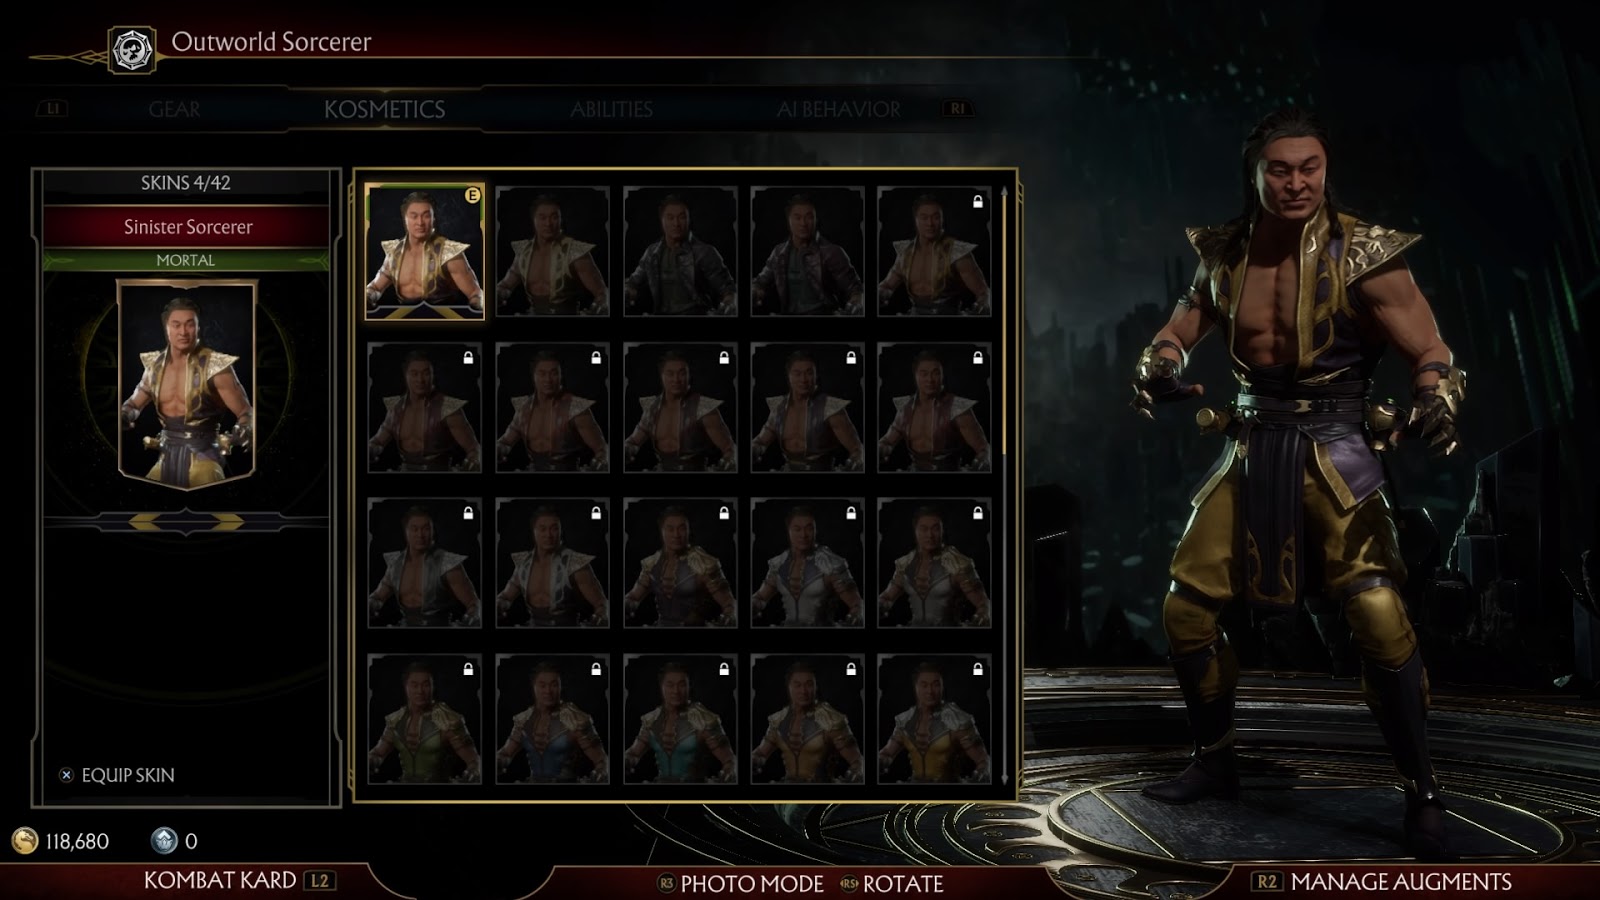 Shang Tsung and Others Revealed in First Mortal Kombat 11 DLC Pack